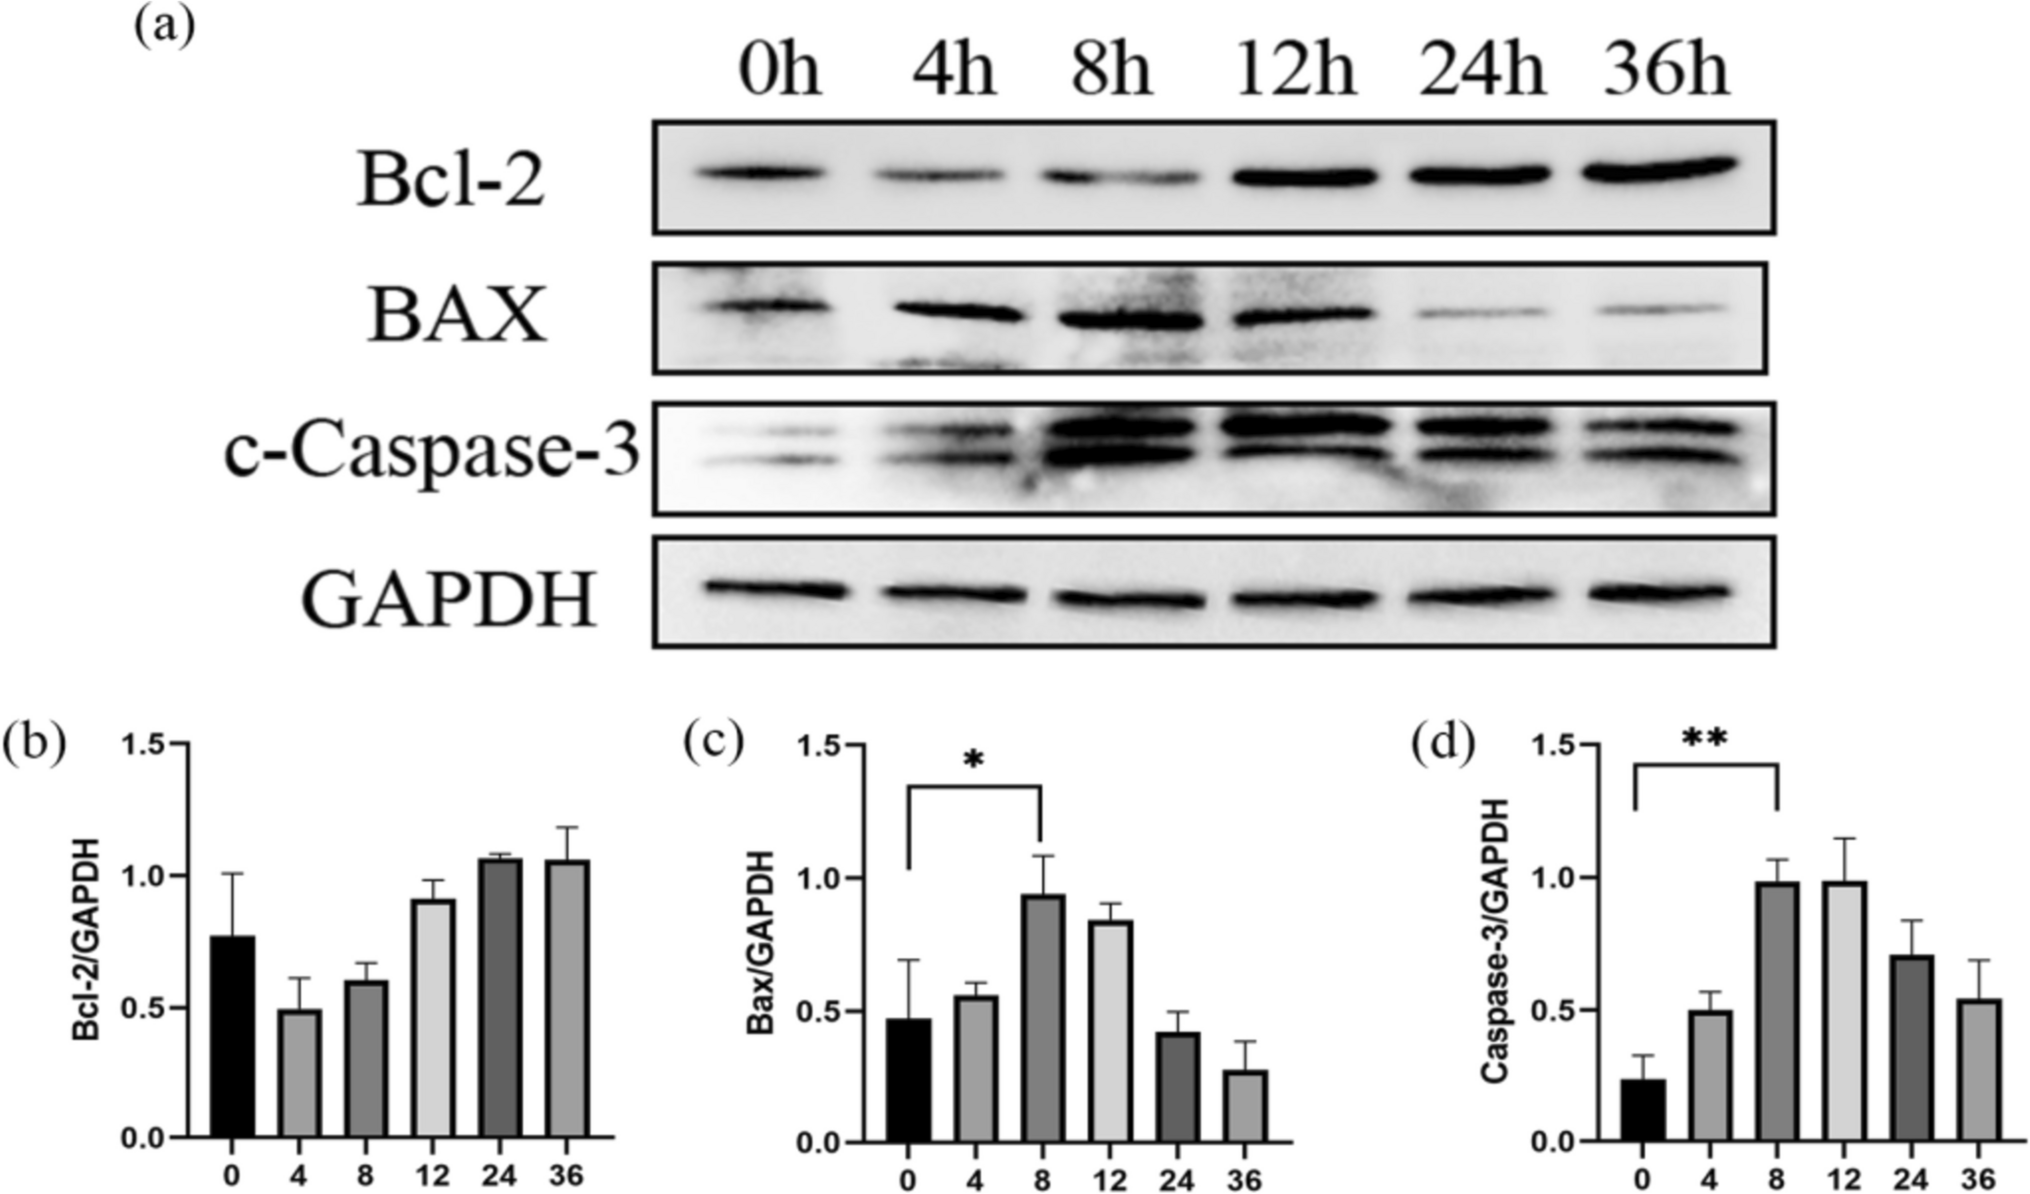 Short-term postmortem interval estimation by detection of apoptosis-related protein in skin